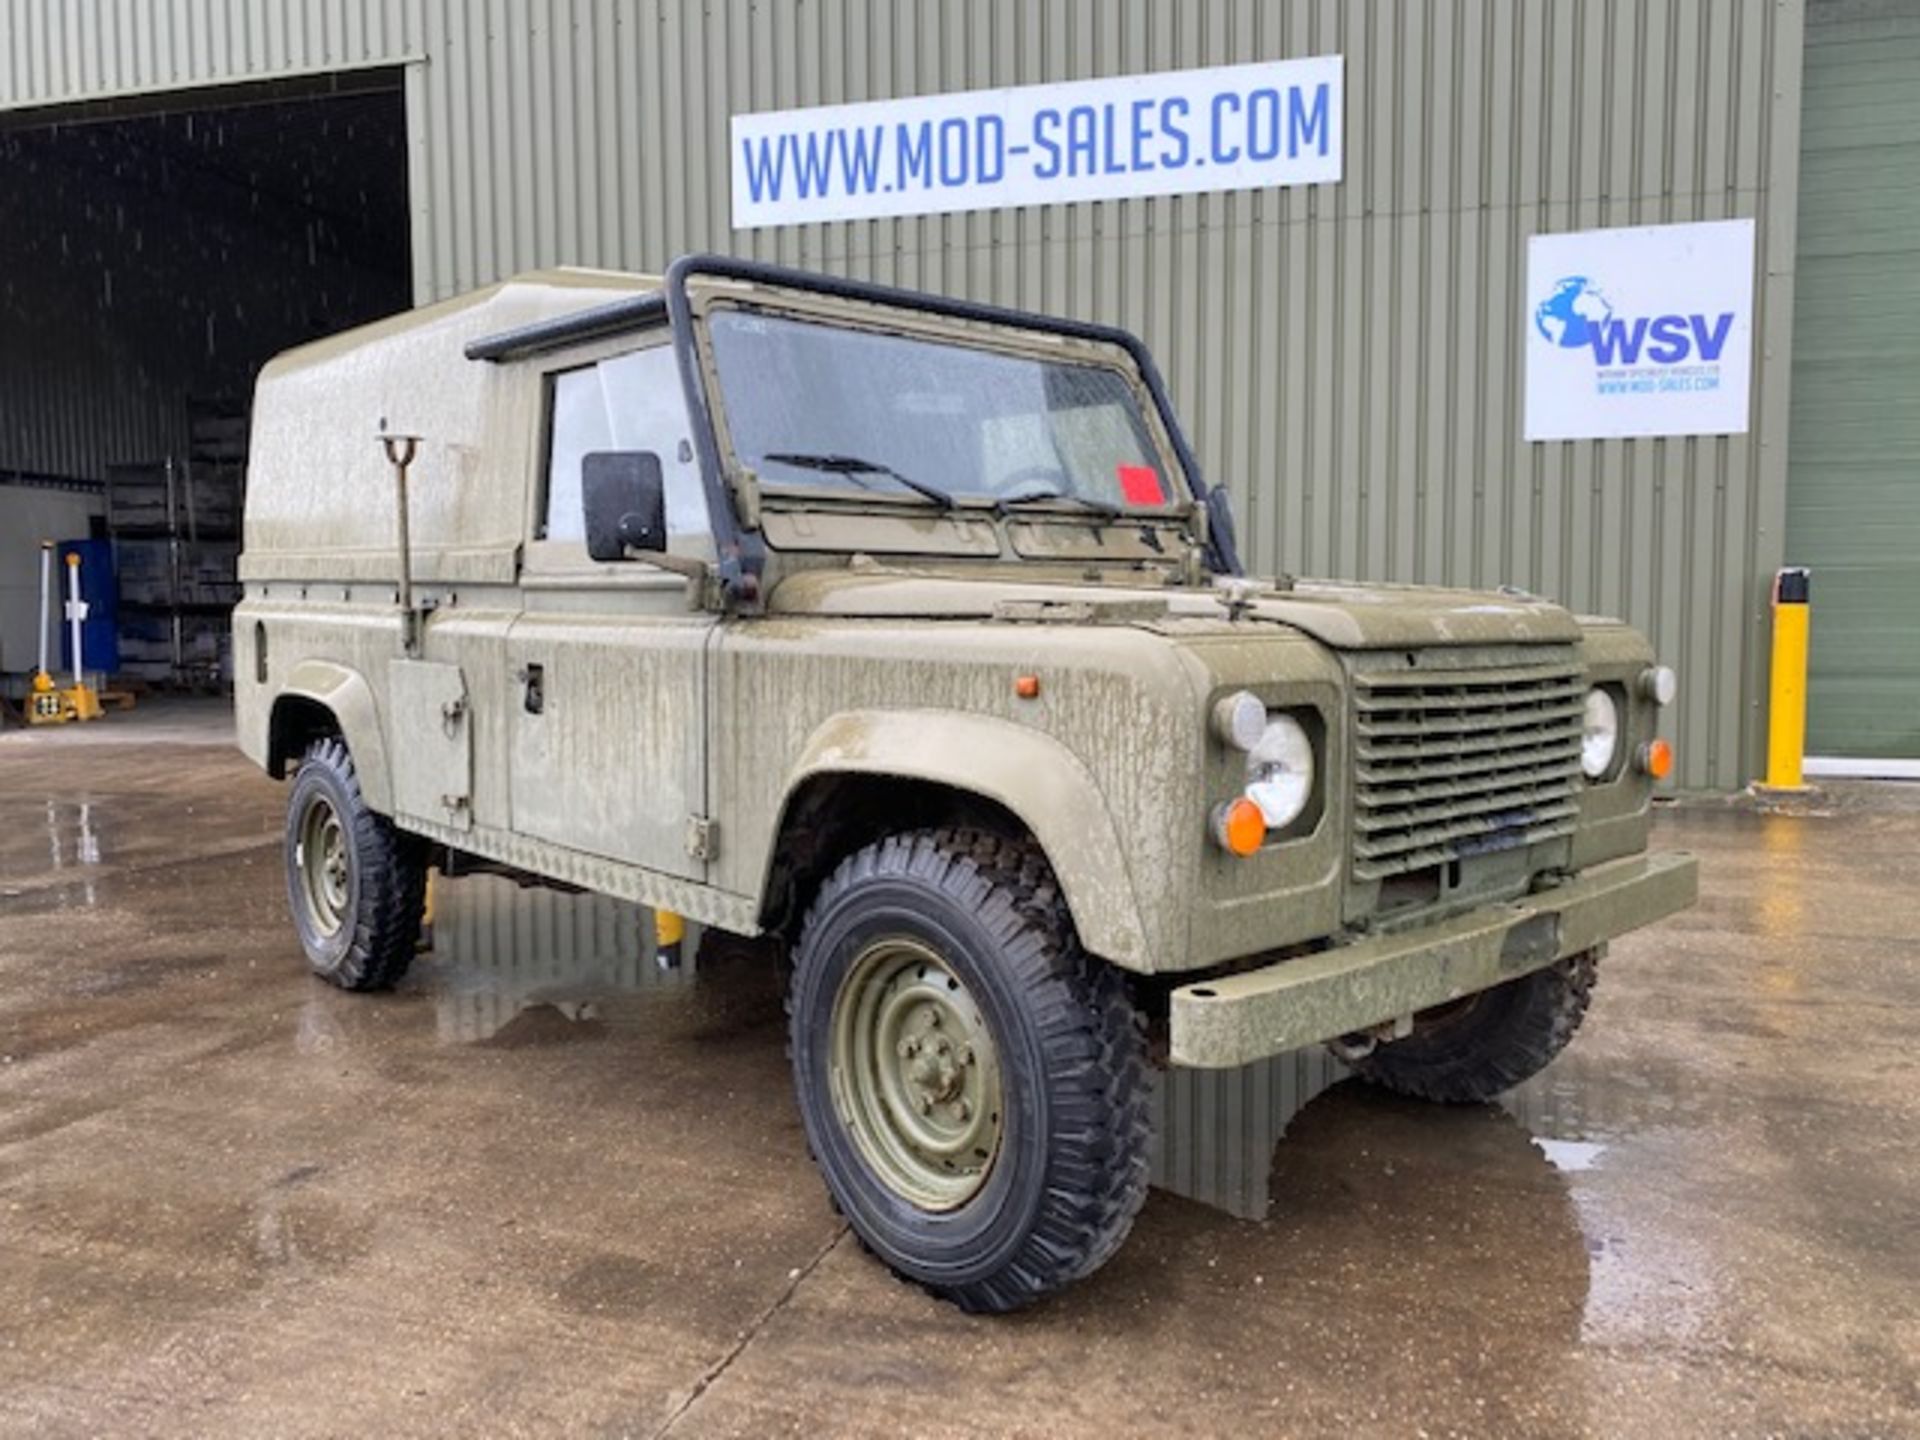 1995 Left Hand Drive Land Rover 110 Tithonus hardtop ONLY 66,824 km - Image 6 of 47